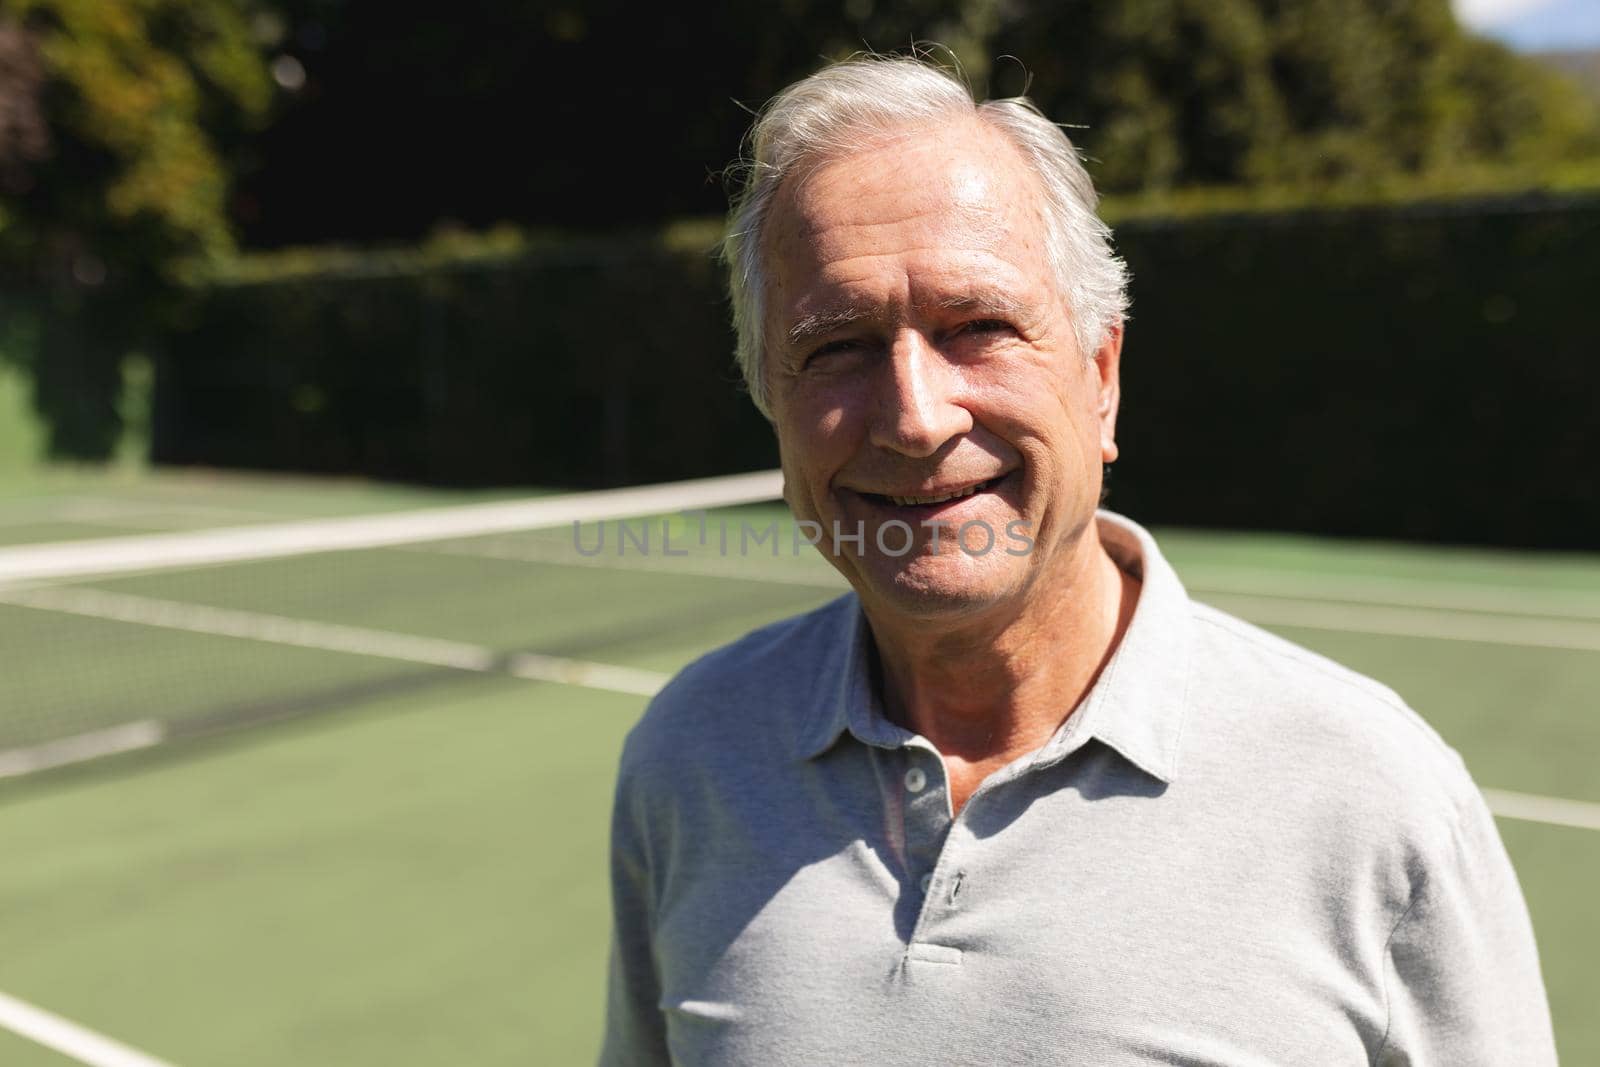 Portrait of senior caucasian man looking at camera and smiling on tennis court. retirement retreat and active senior lifestyle concept.